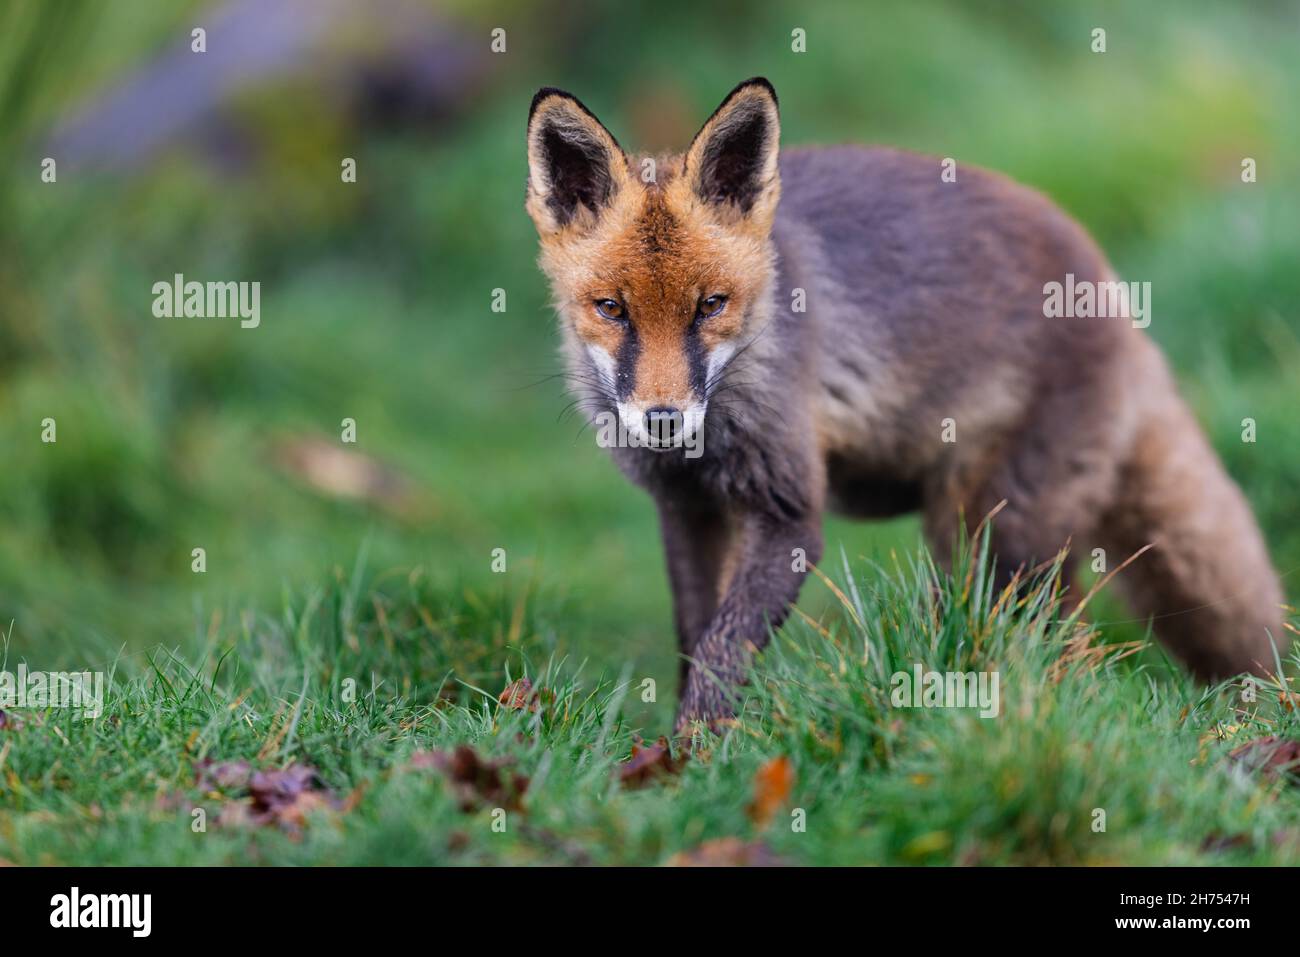 A red fox walking in the forest Stock Photo